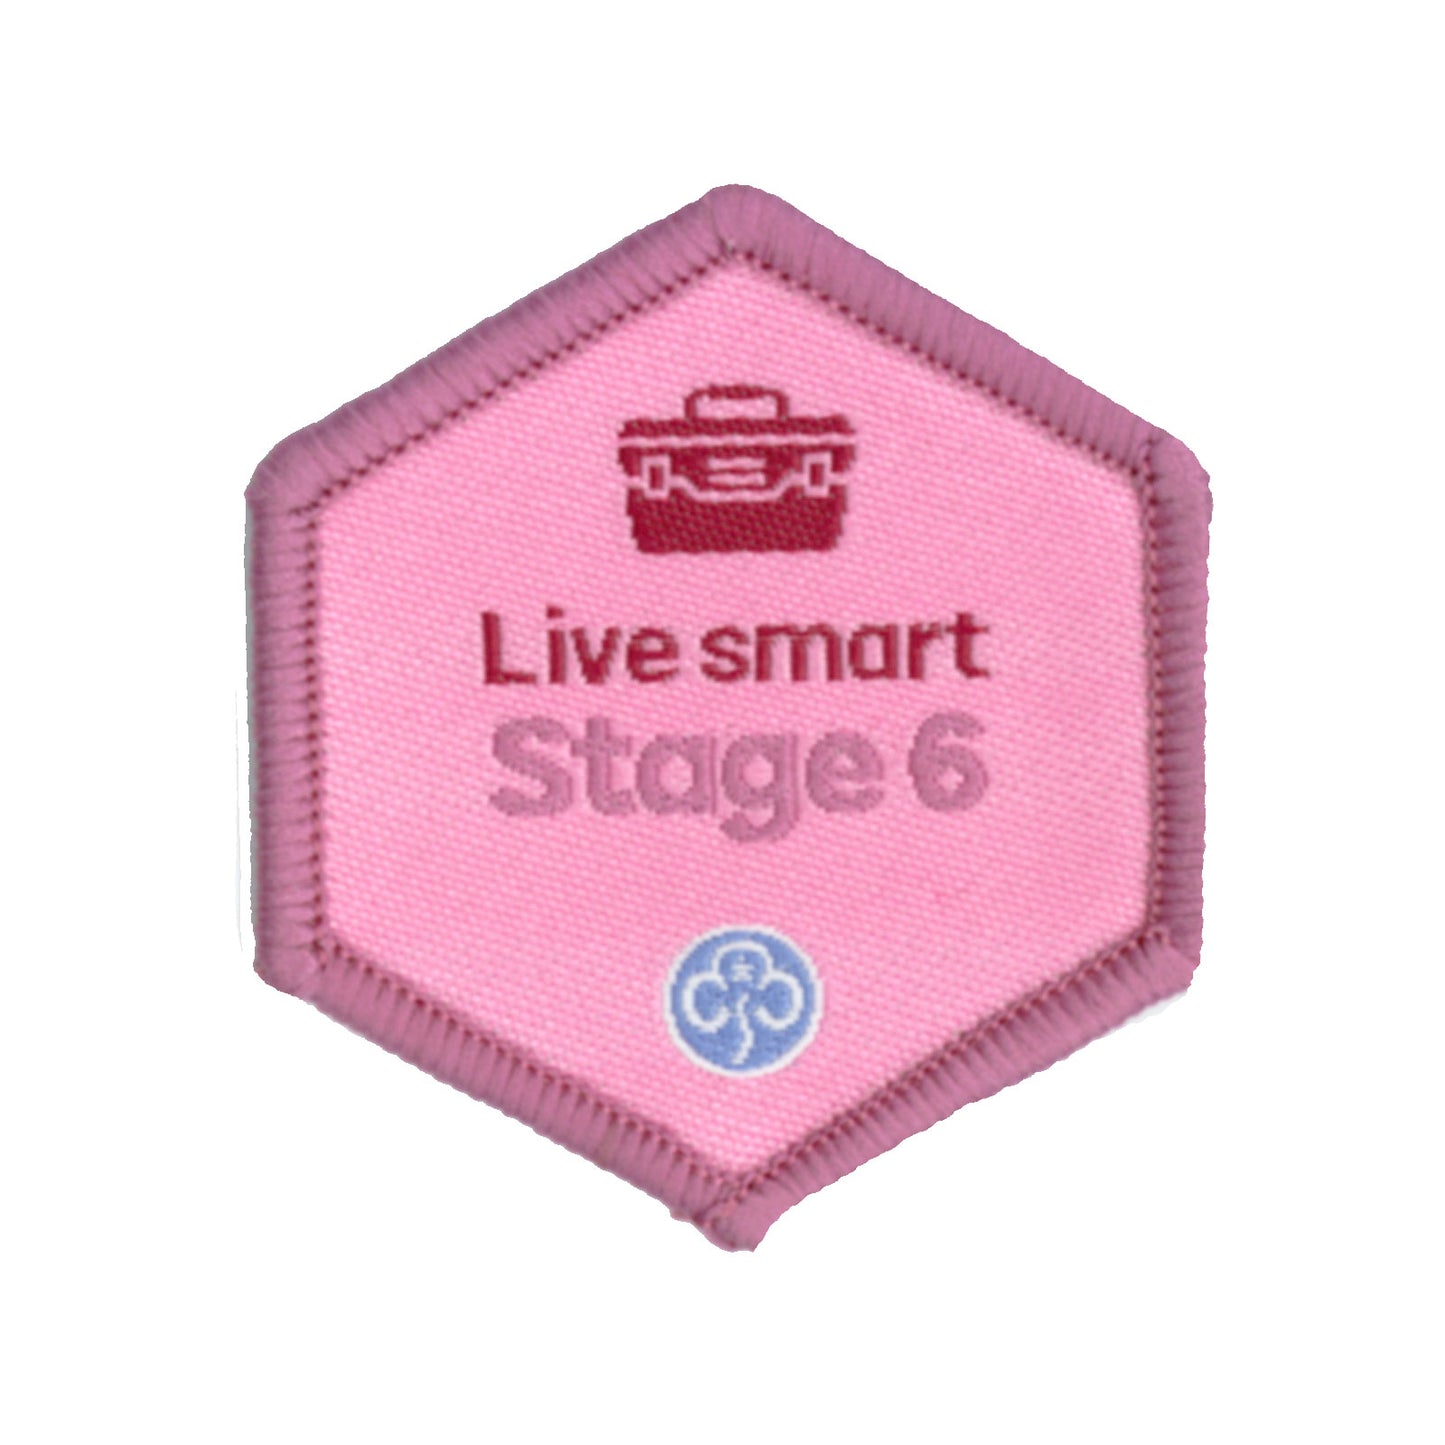 Skills Builder - Skills For My Future - Live Smart Stage 6 Woven Badge